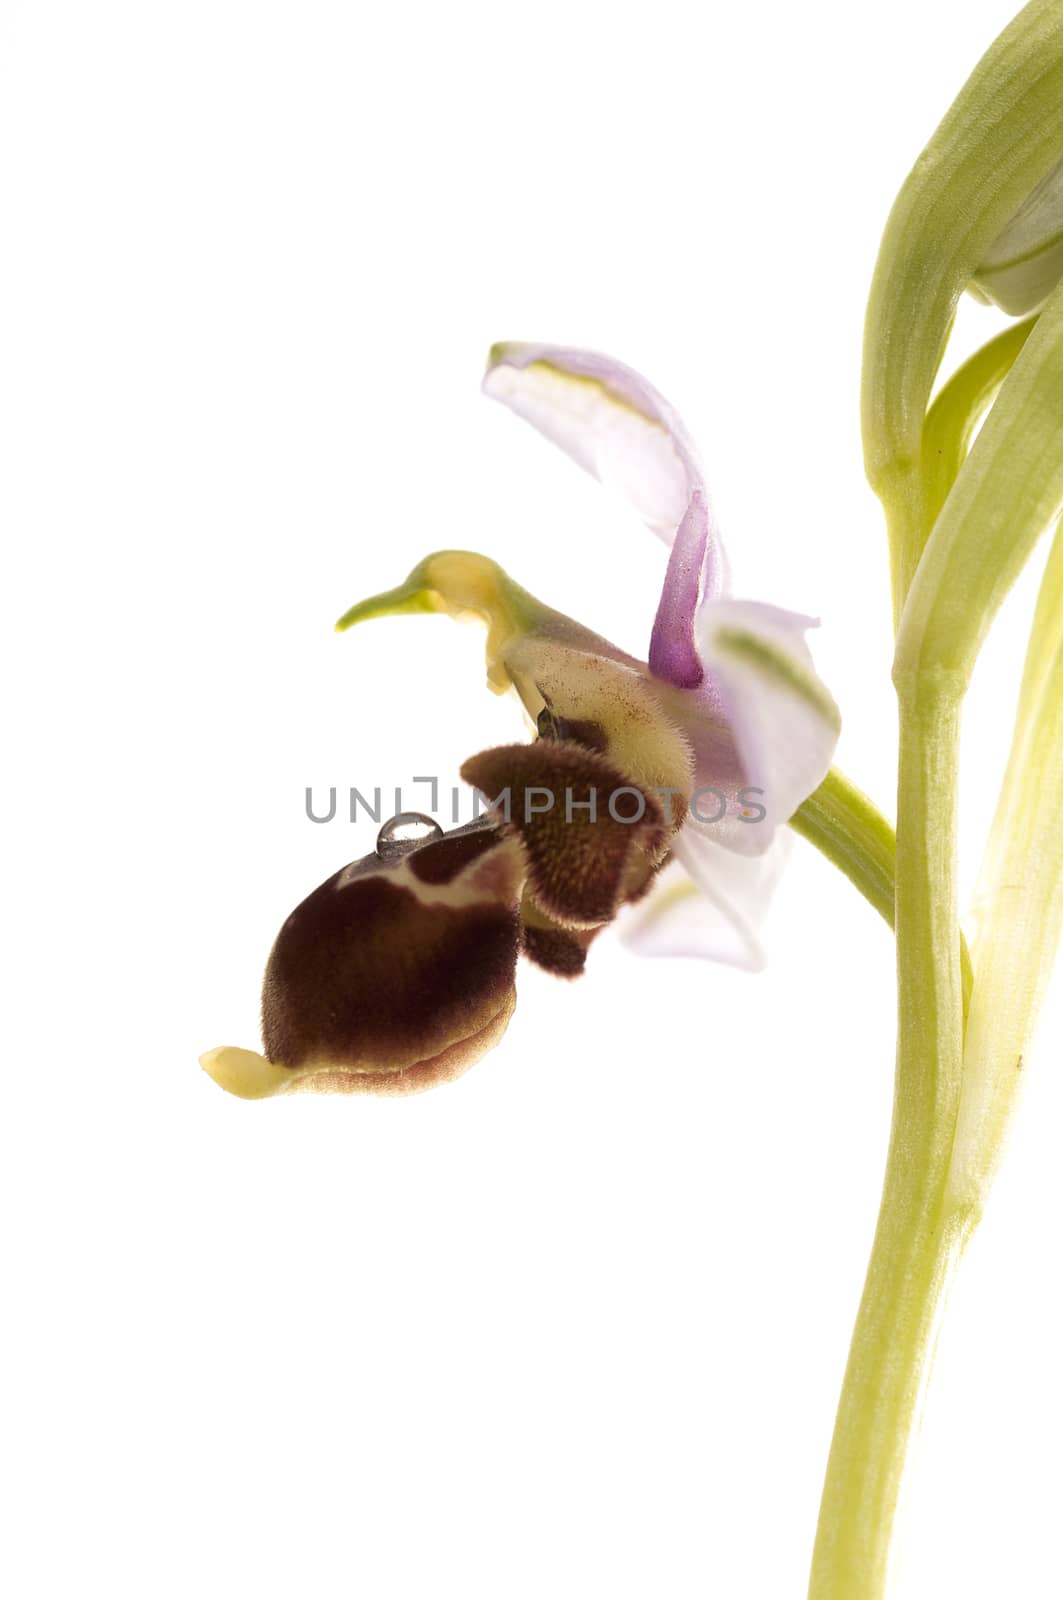 Wild orchid from southern Western Europe, Bee orchids, Ophrys sc by jalonsohu@gmail.com